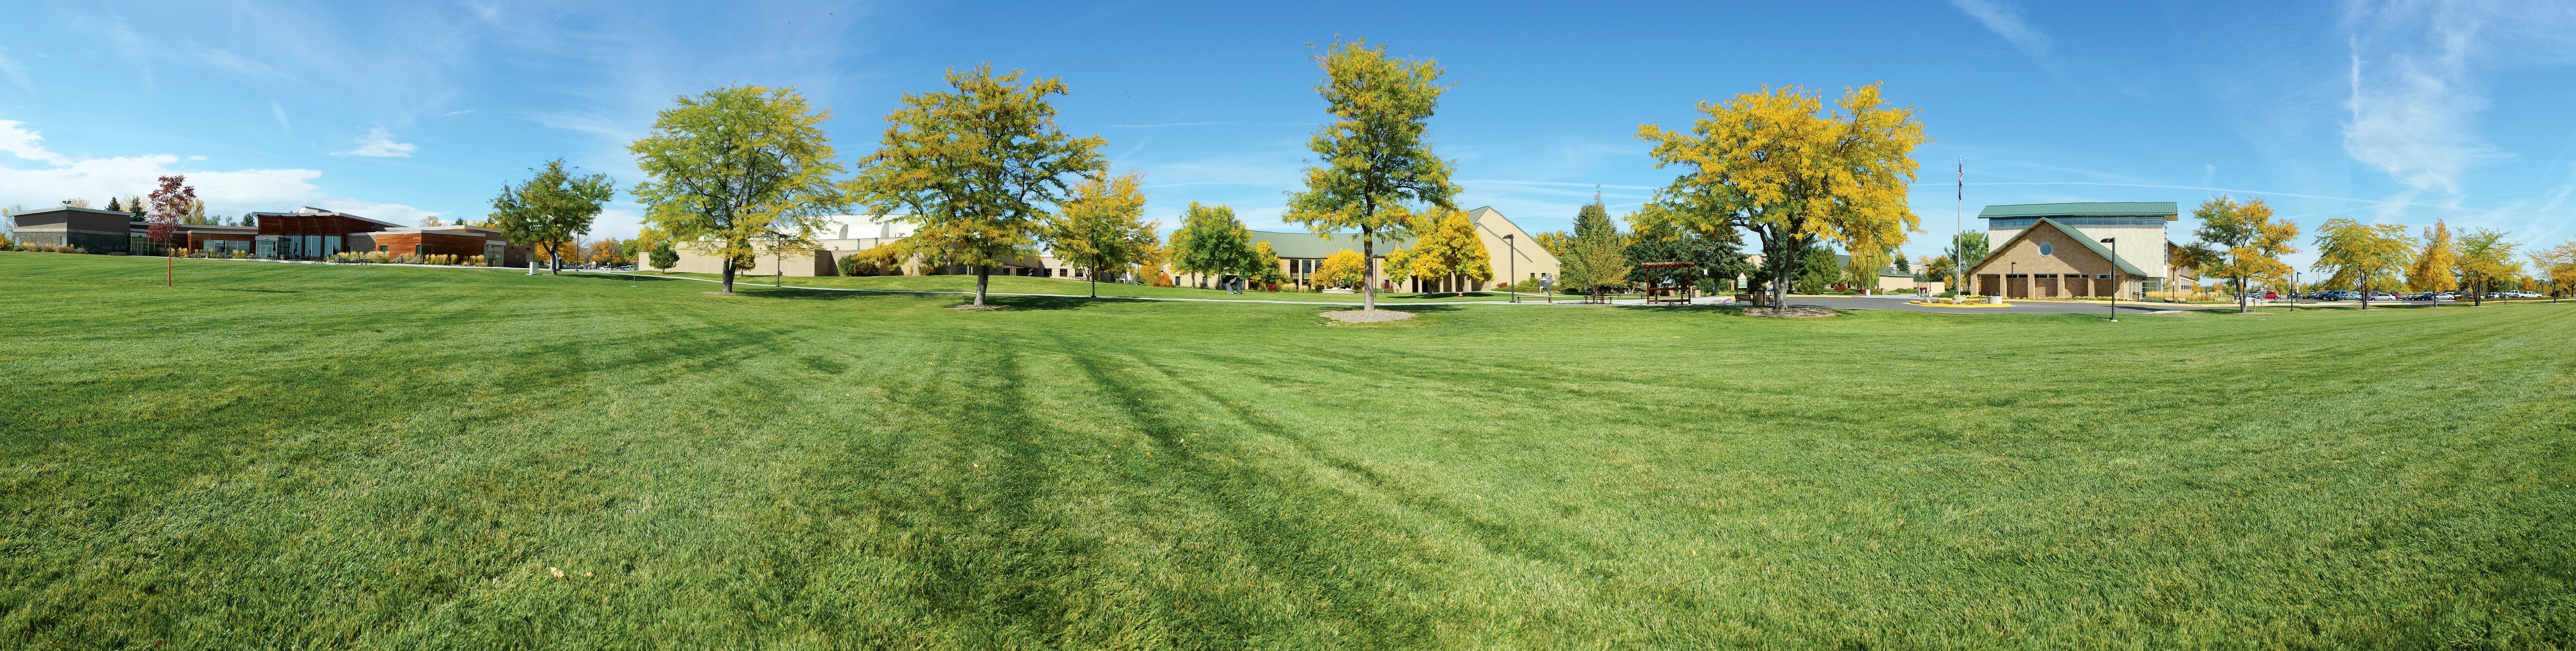 photo of the CWC campus front lawn with trees and green grass. The buildings are in the background